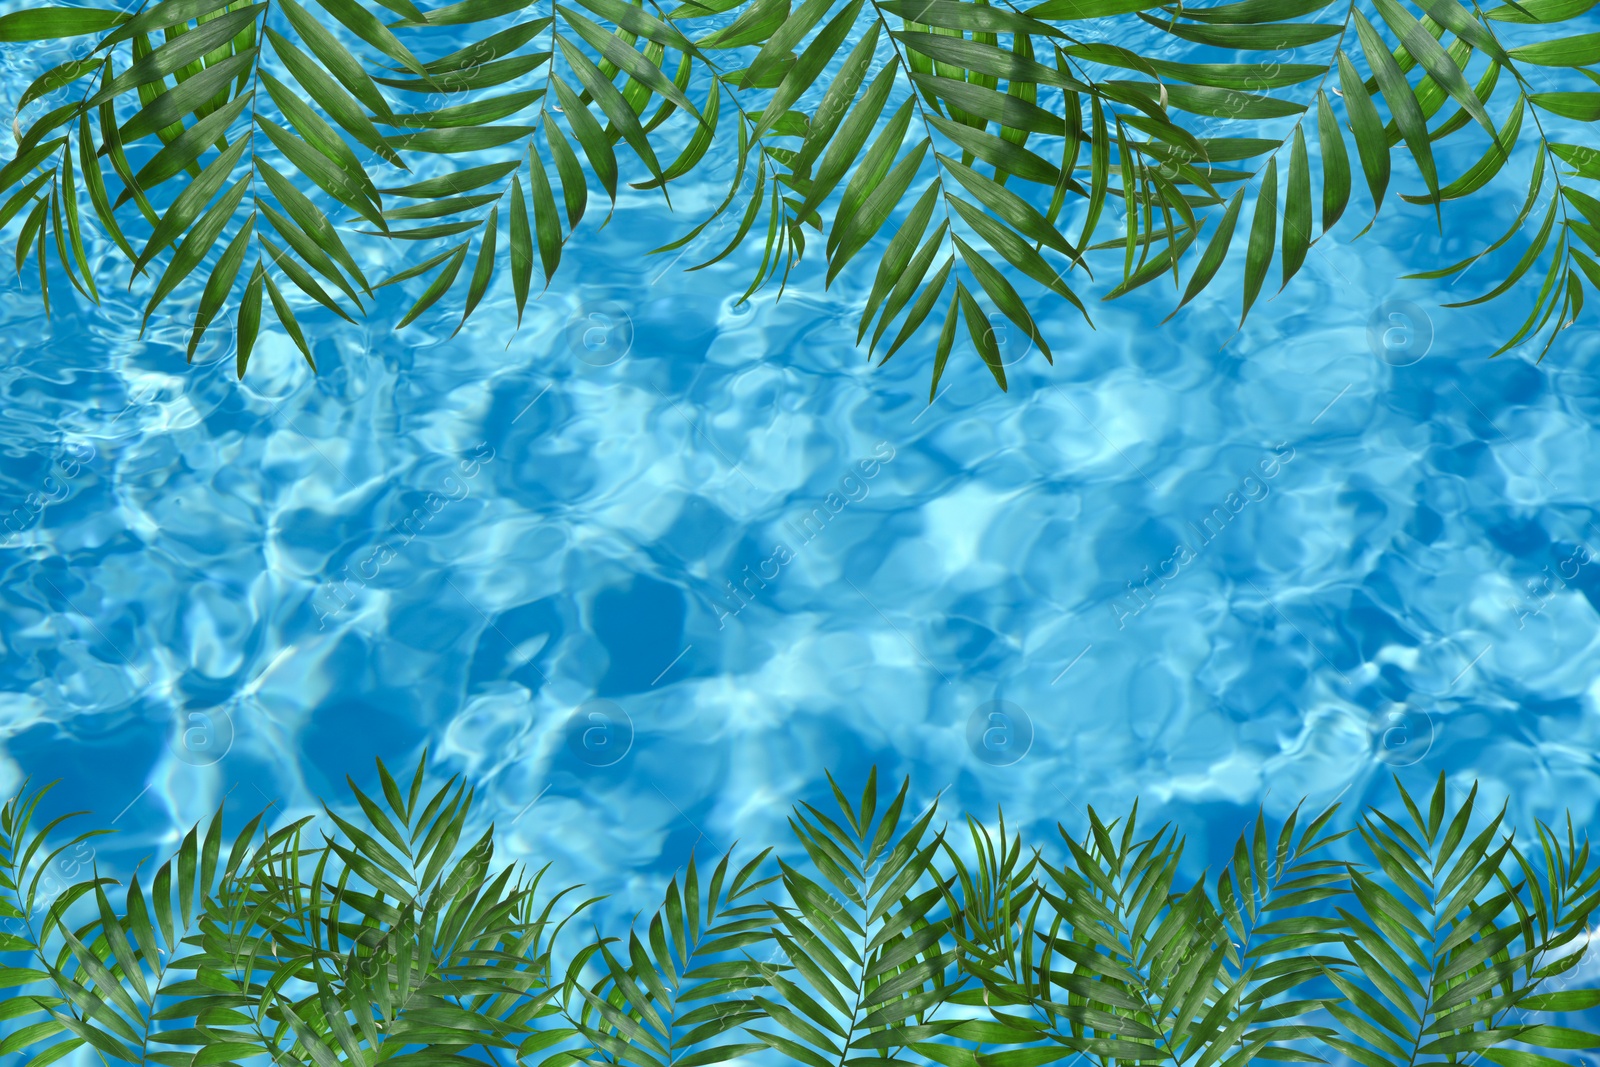 Image of View of beautiful green tropical leaves and outdoor swimming pool as background